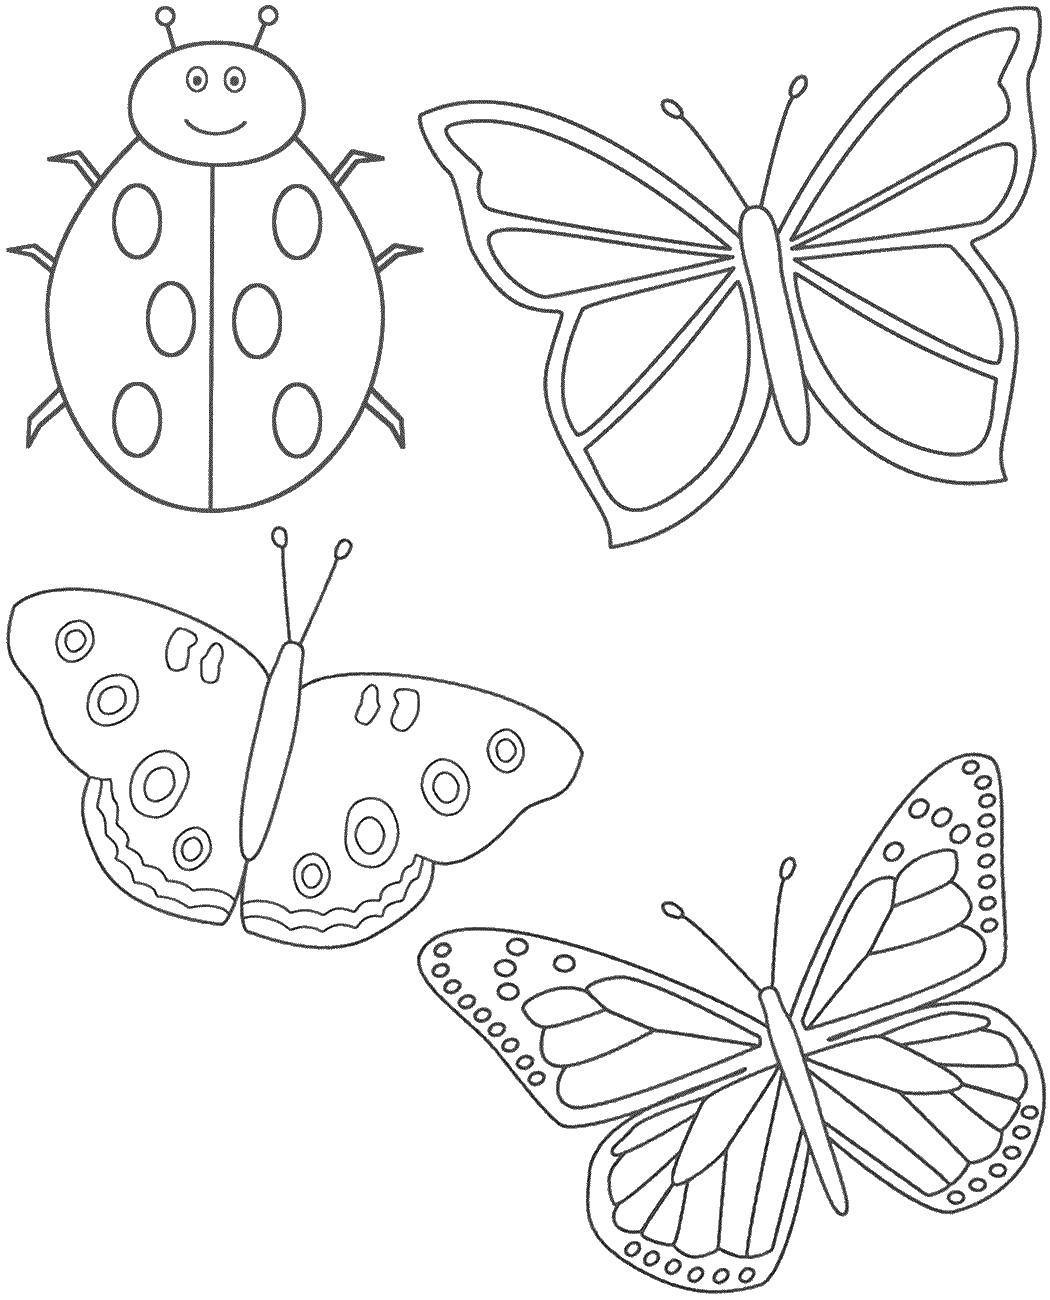 Coloring Ladybug and butterfly. Category Ladybug. Tags:  insects, ladybirds, butterflies.